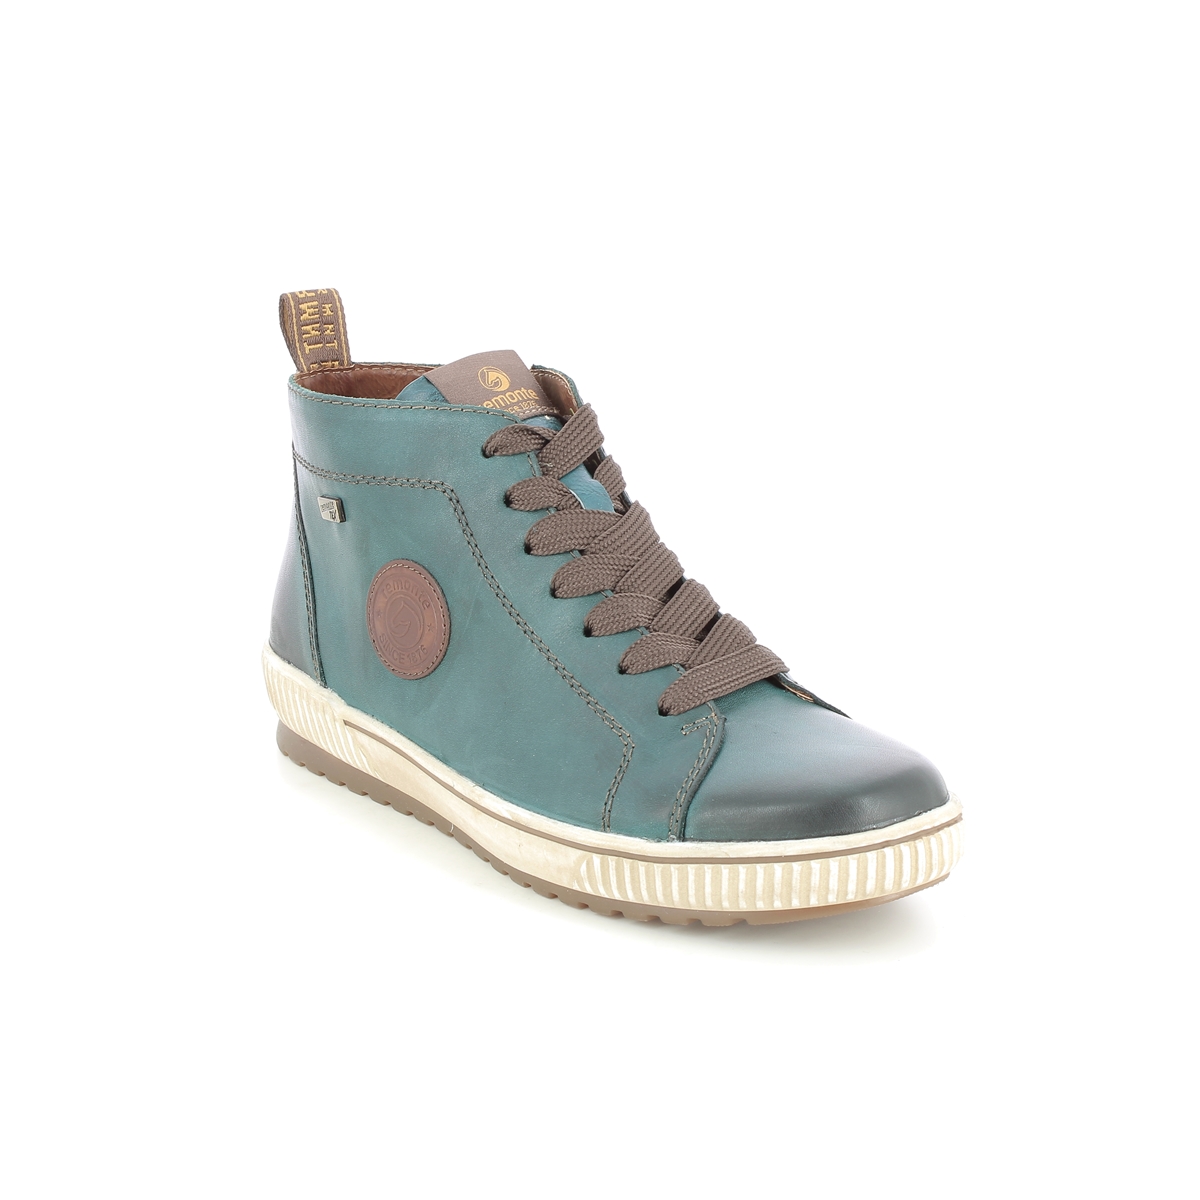 Remonte Tanalobo Tex Turquoise Leather Womens Hi Tops D0771-12 In Size 36 In Plain Turquoise Leather